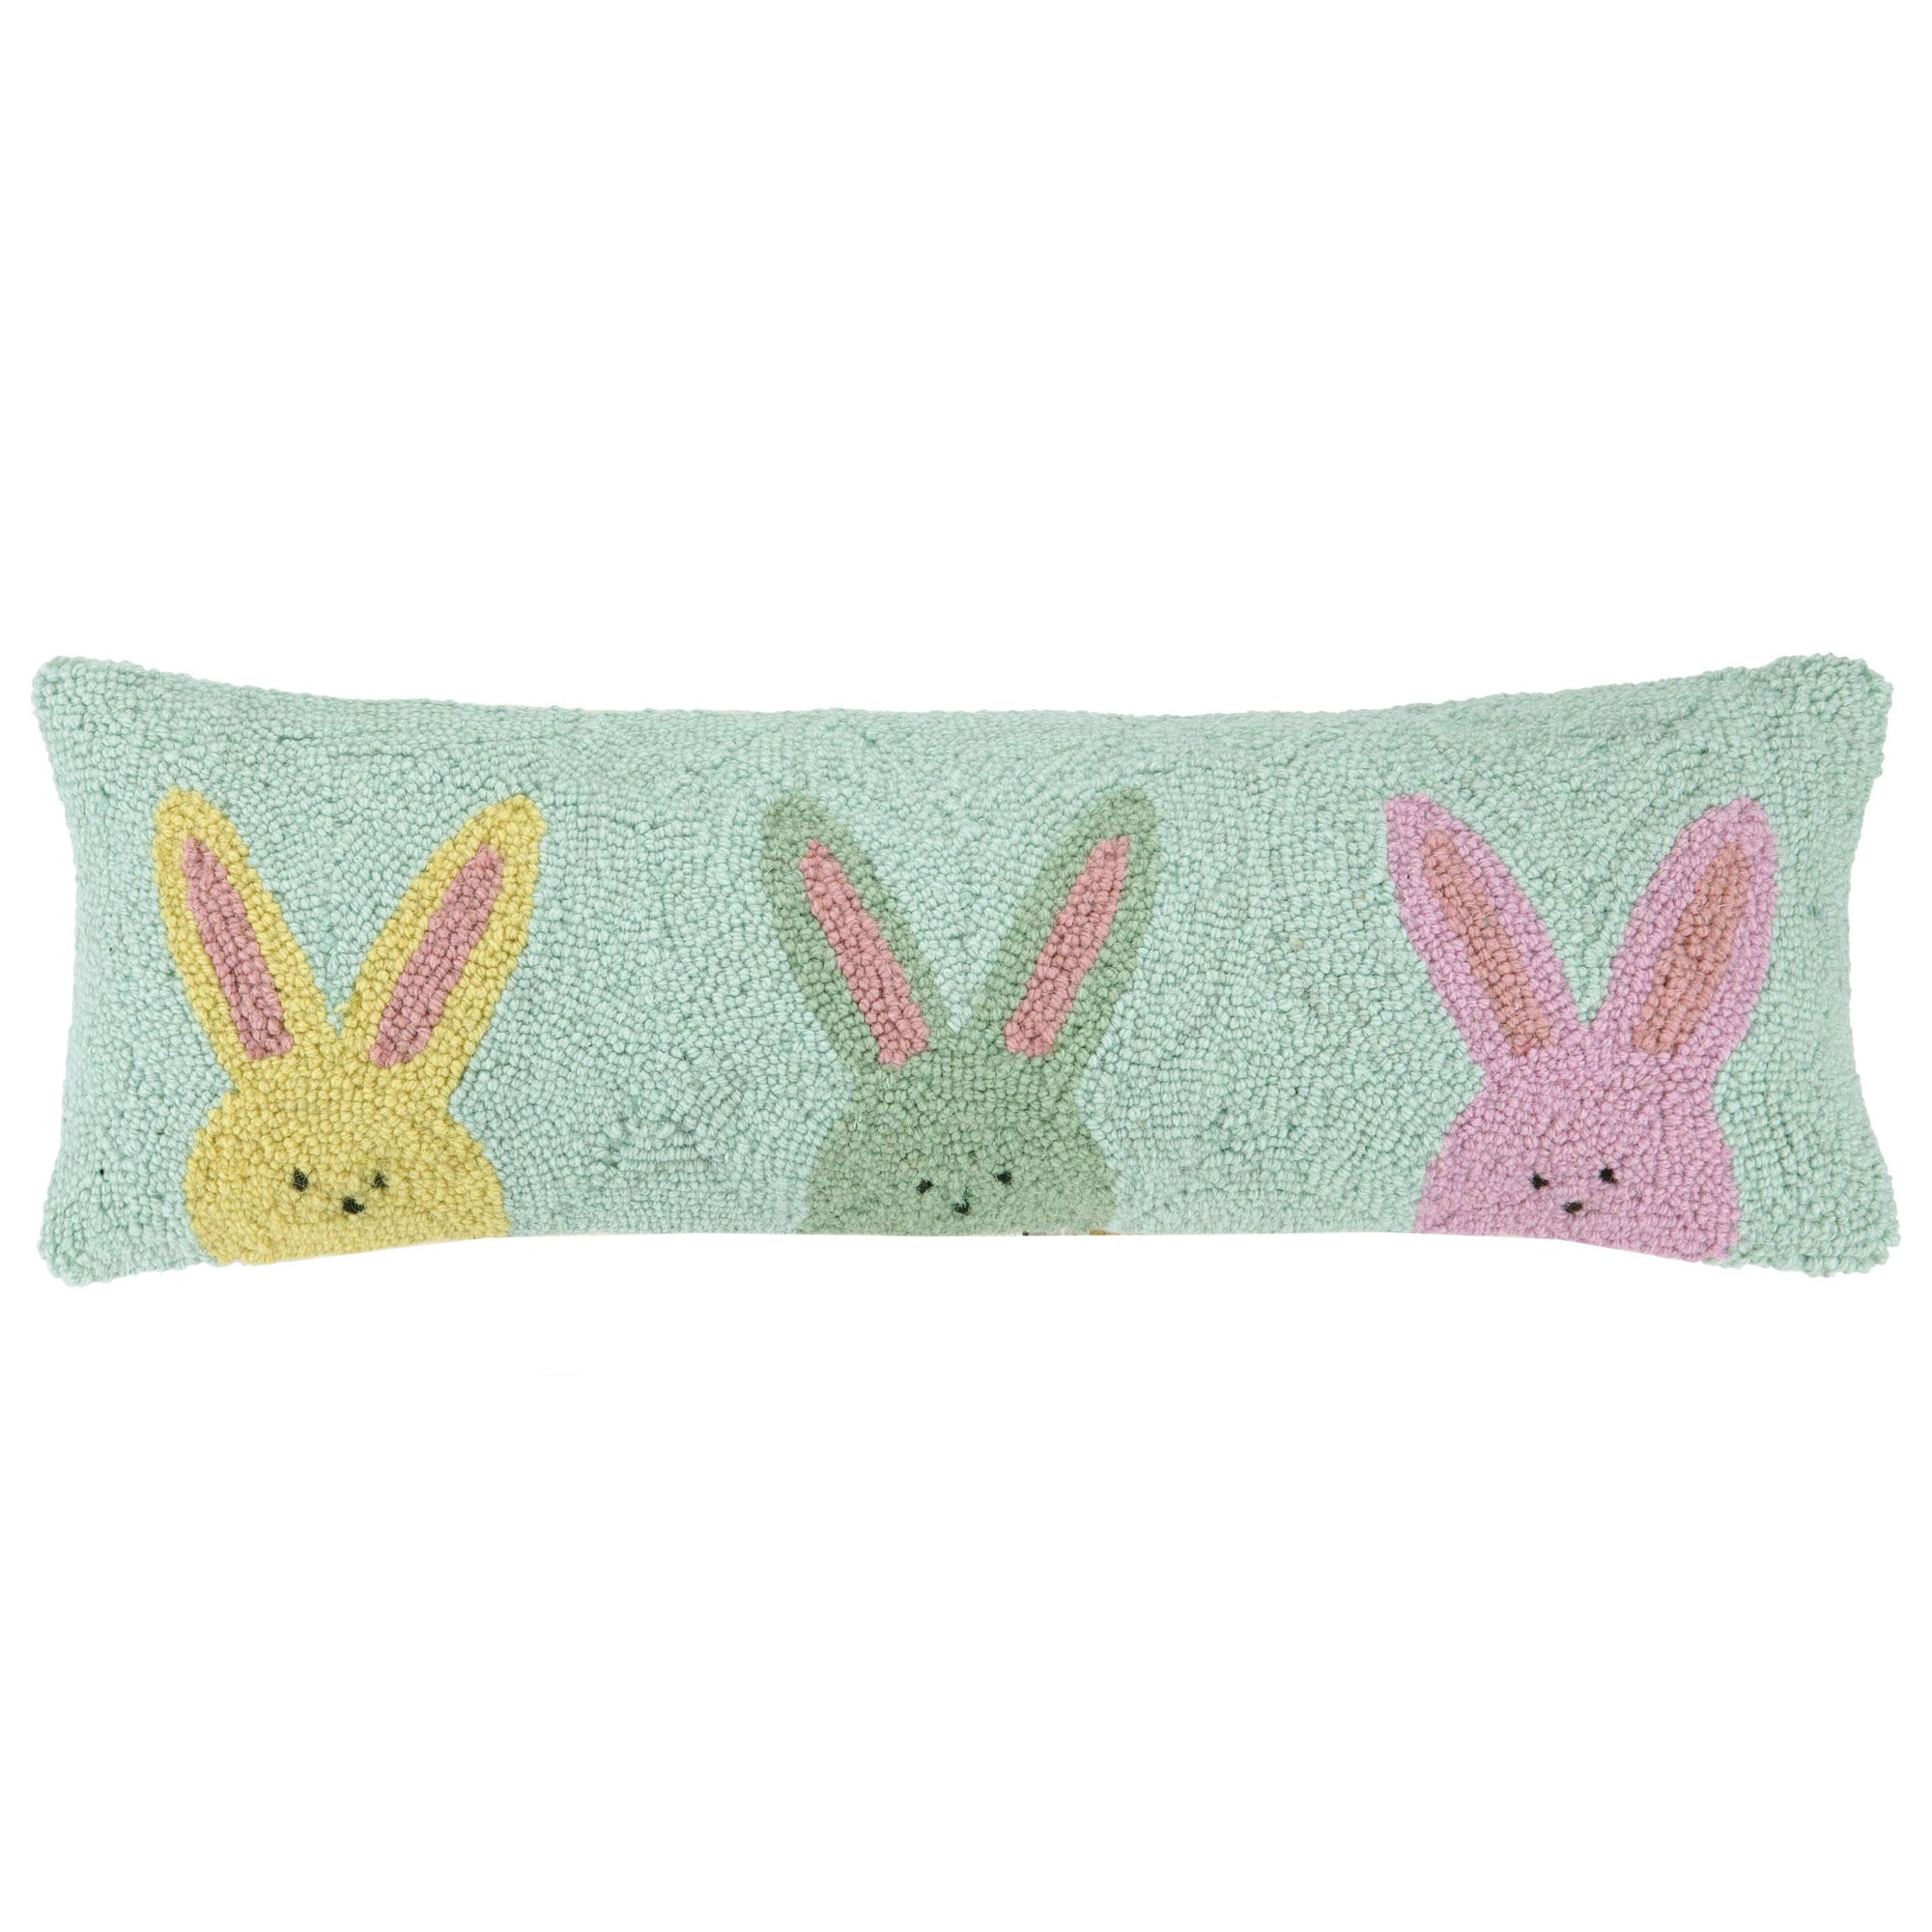 Three Rugee Peeps Type Bunnies Hook Pillow - The Preppy Bunny